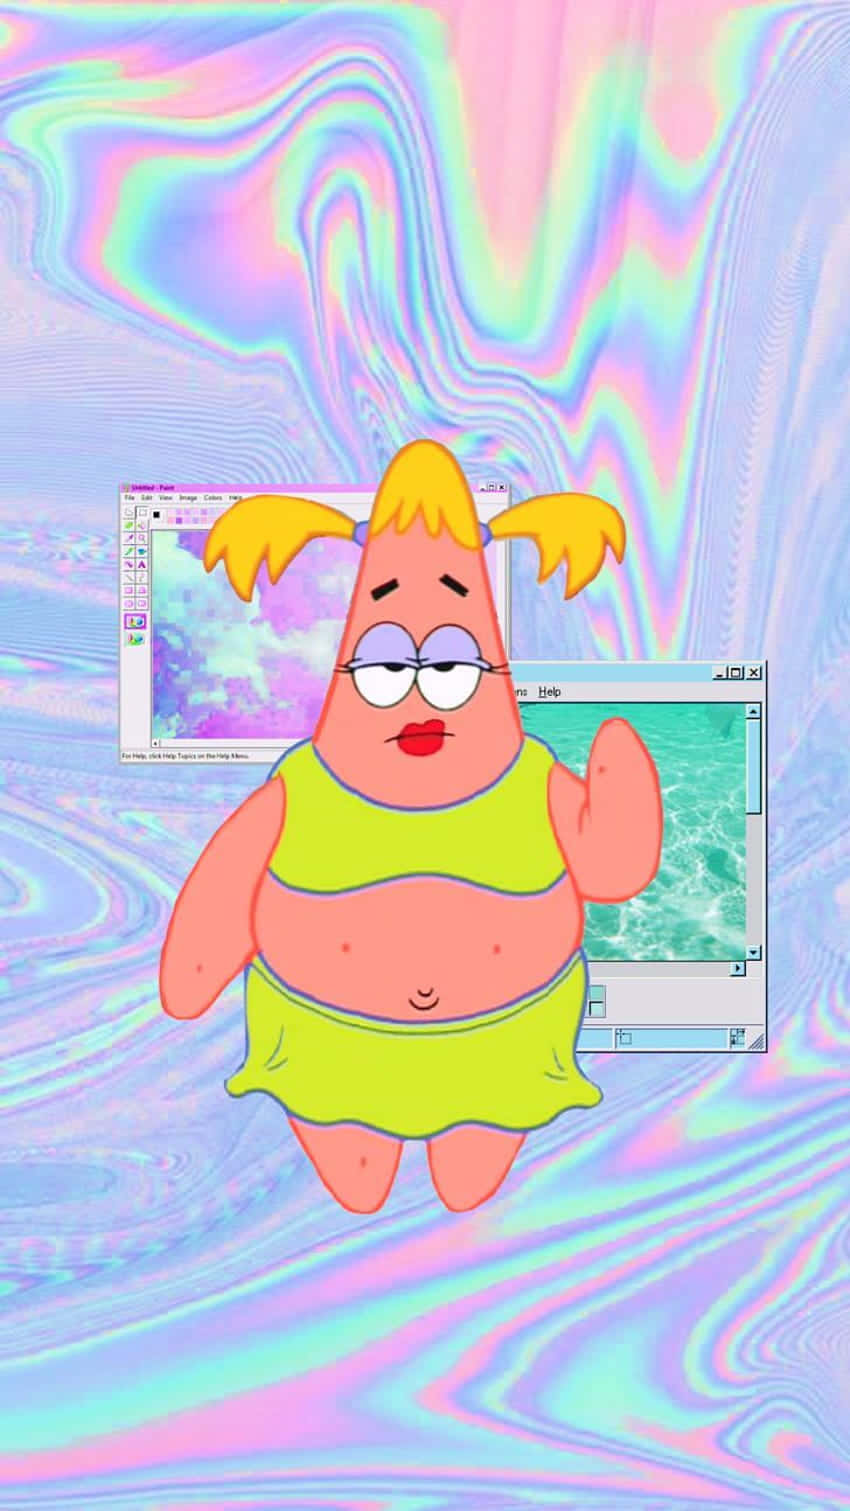 Patrick Loves To Relax And Enjoy The Sounds Of The Ocean. Wallpaper